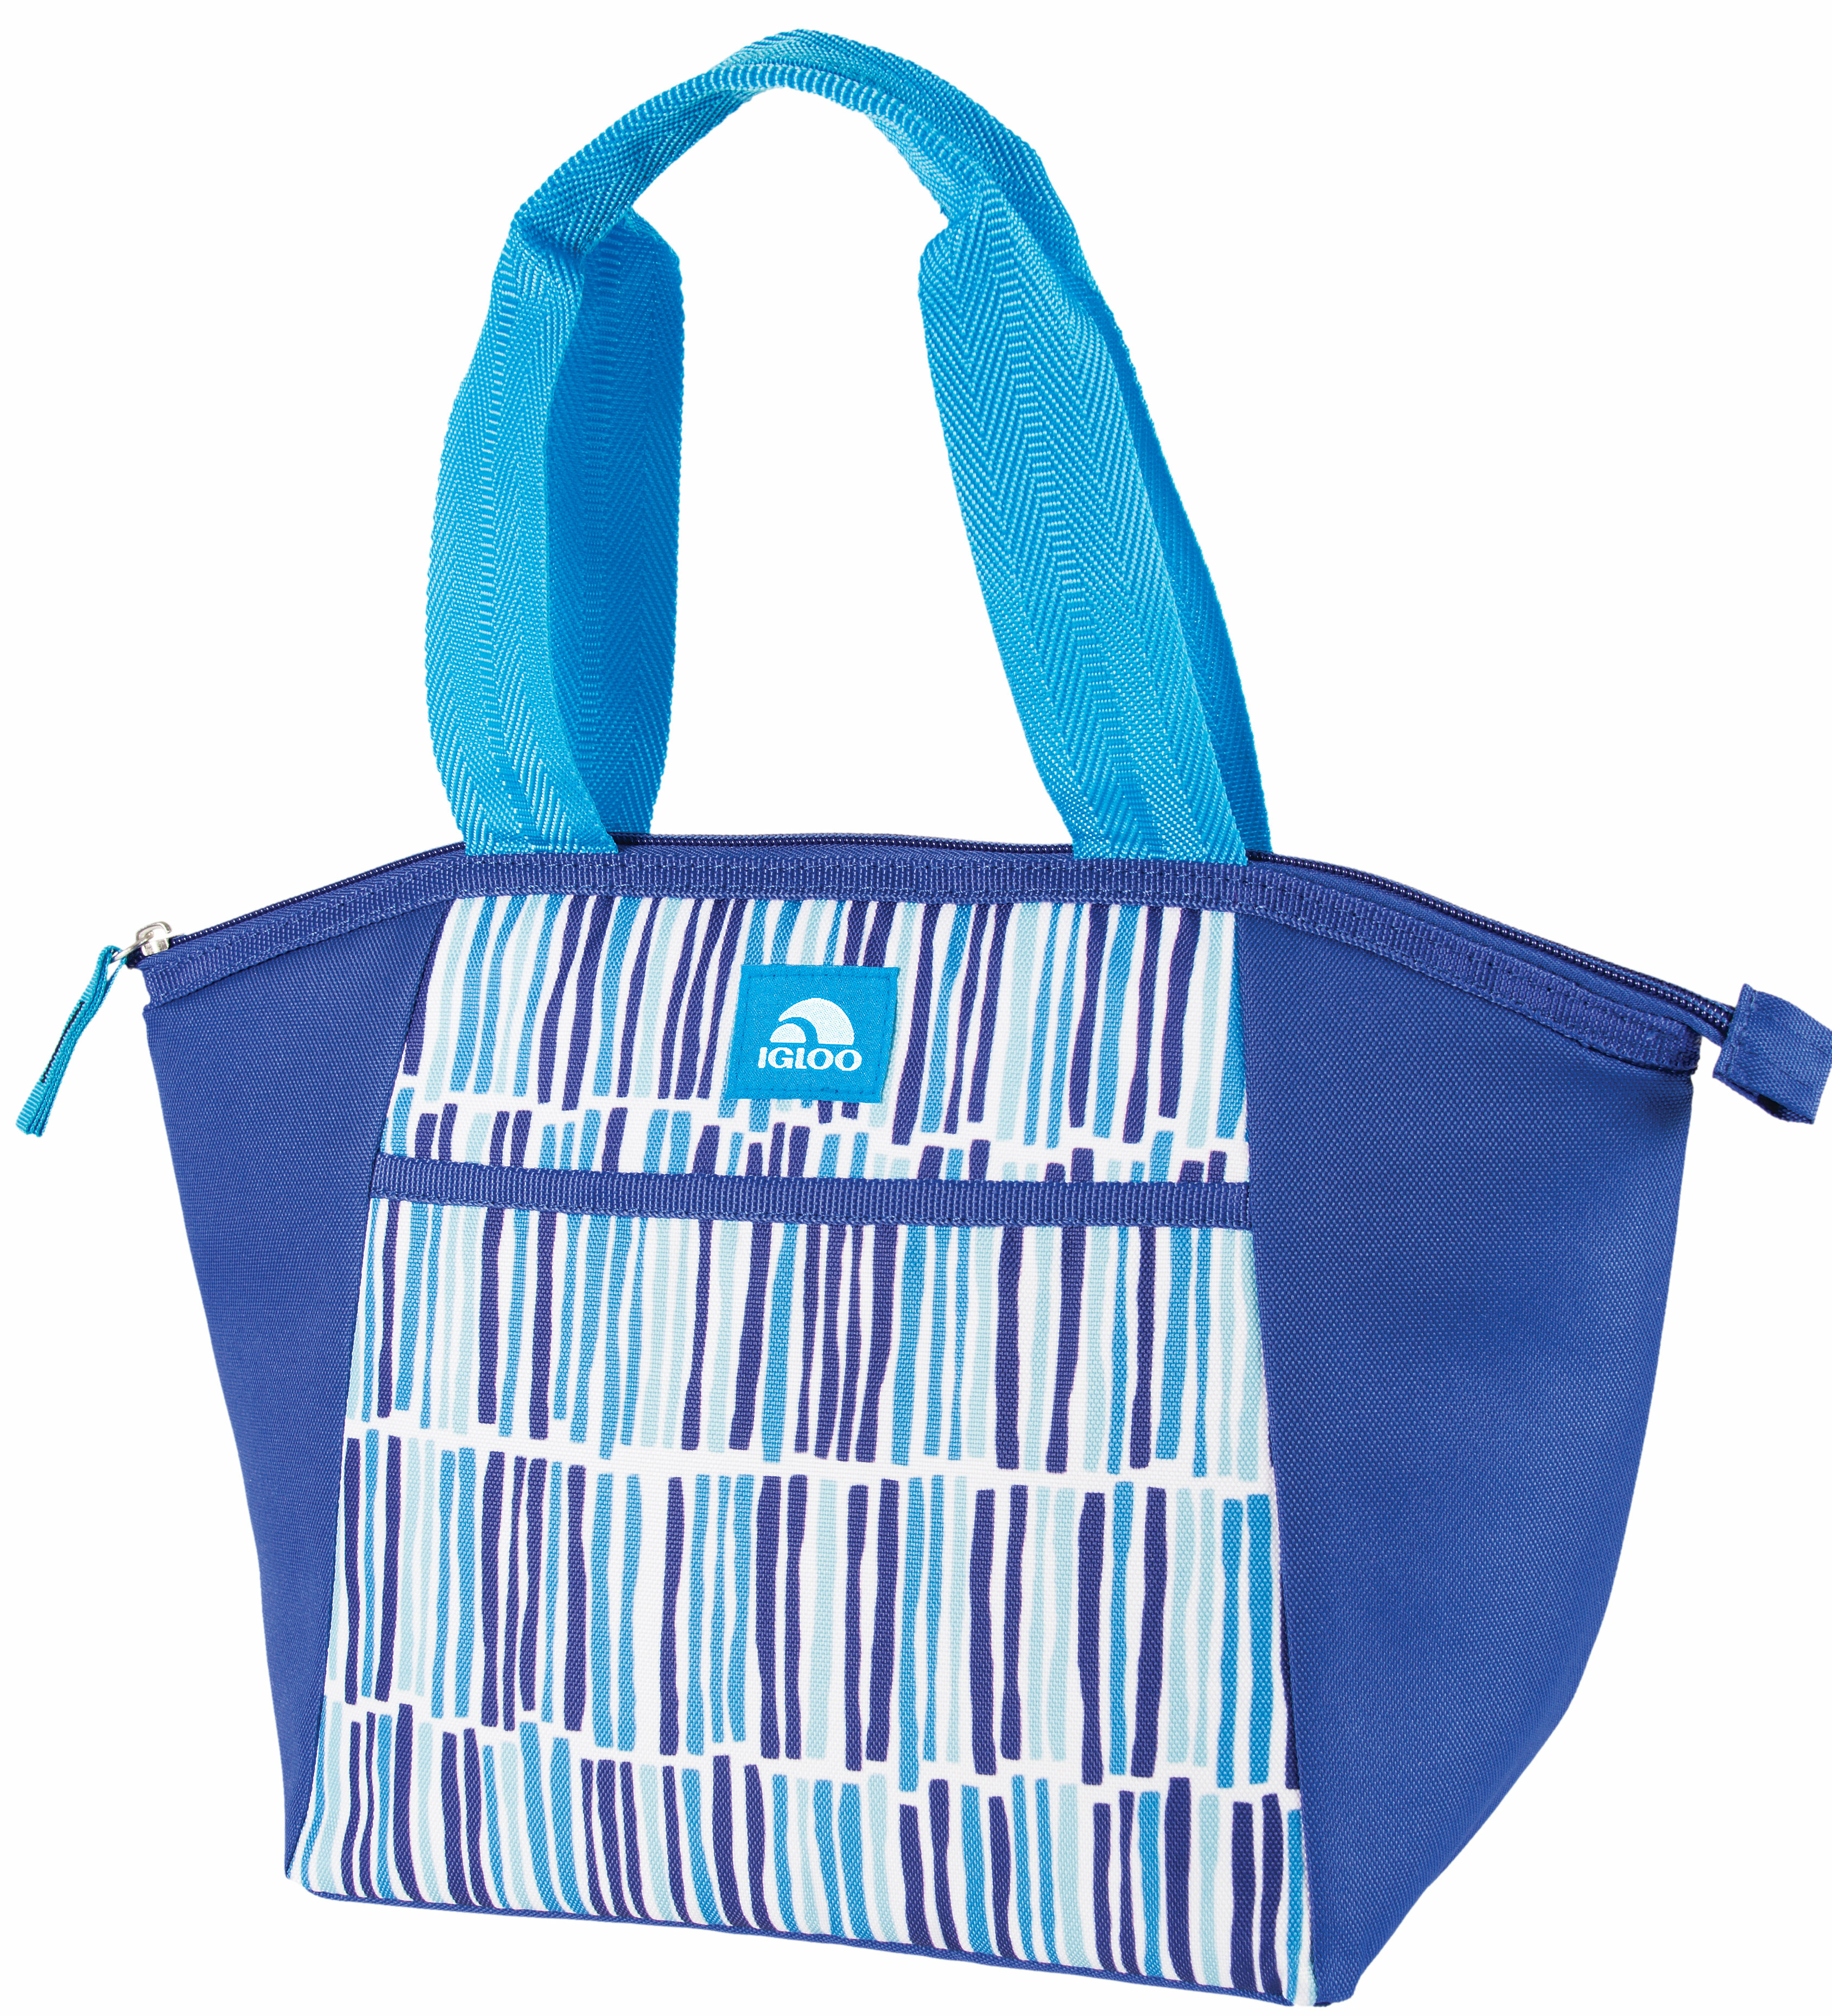 igloo cooler lunch tote